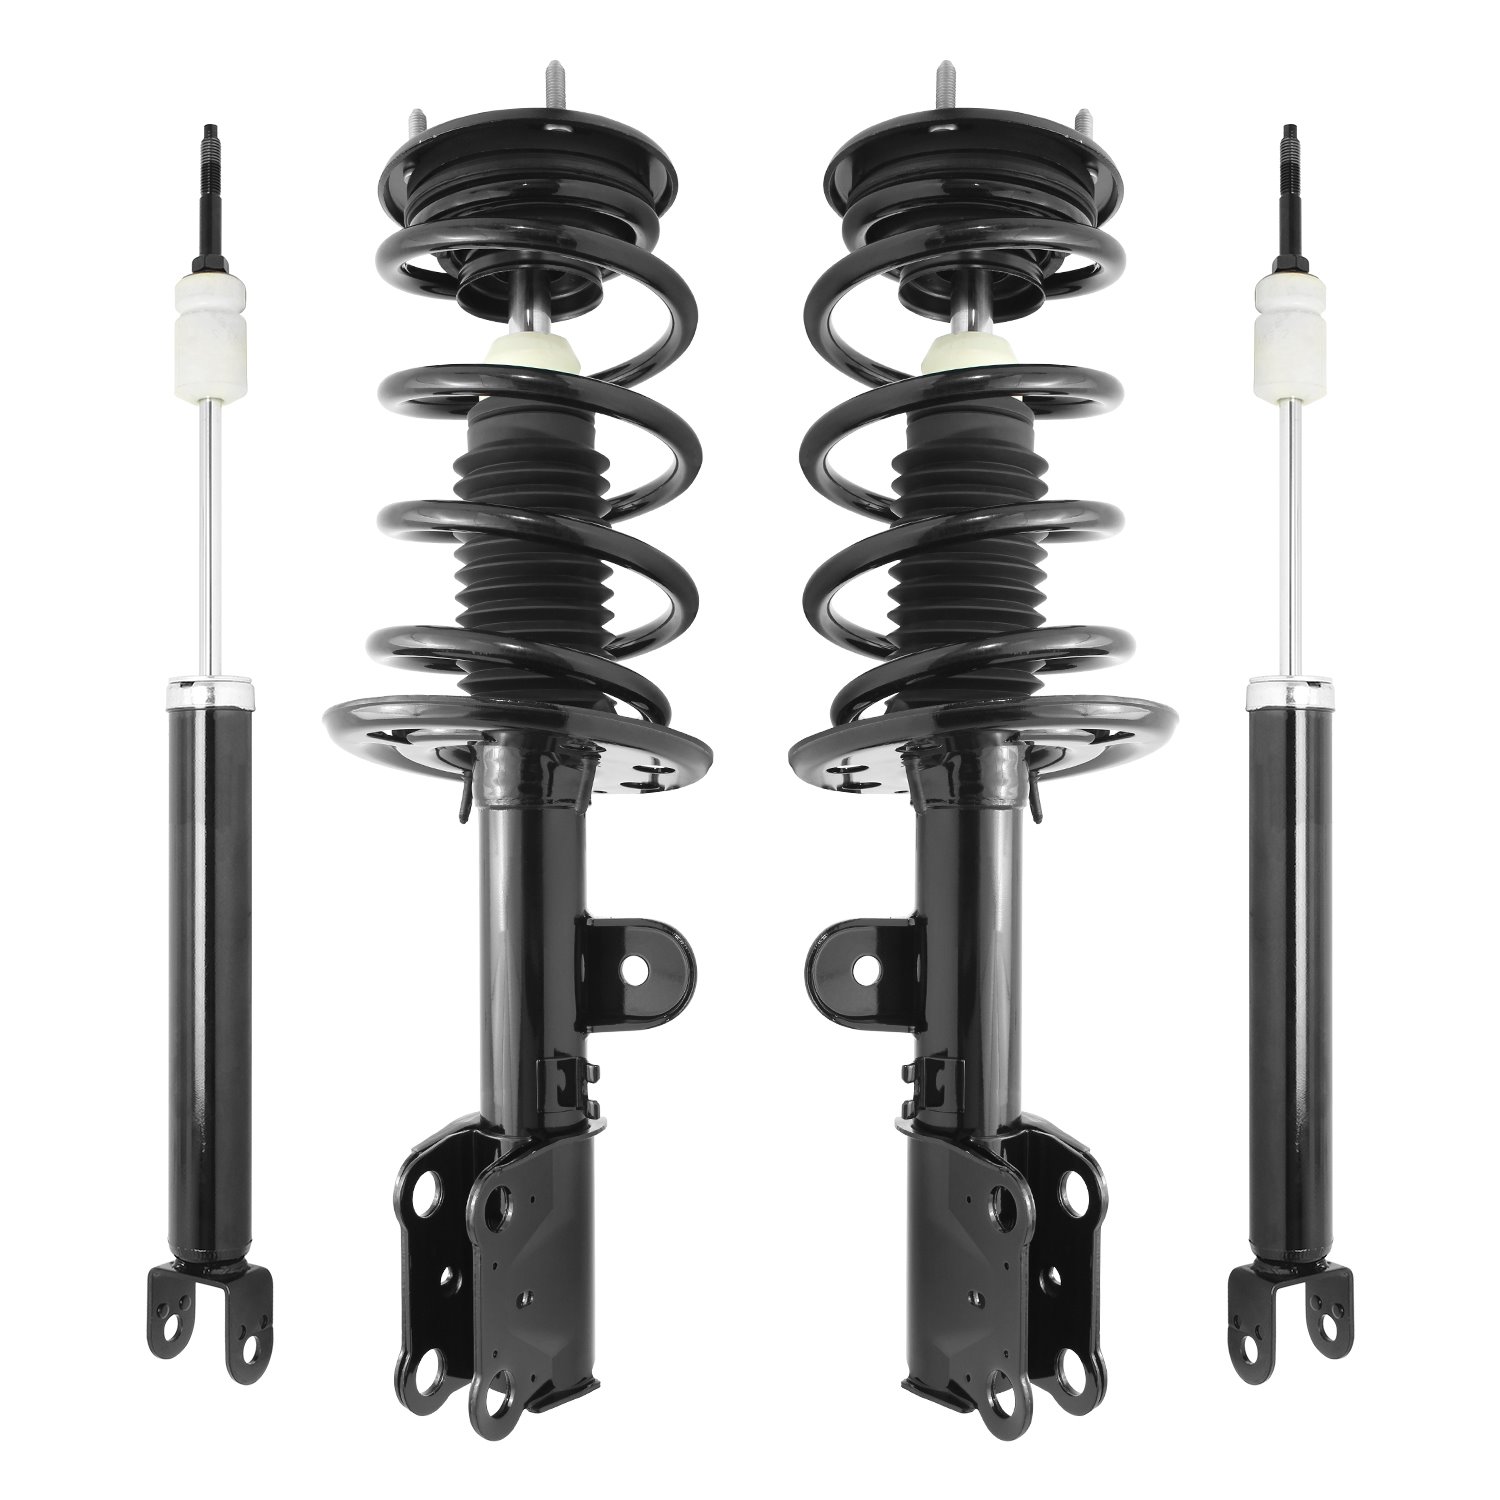 4-11015-252120-001 Front & Rear Suspension Strut & Coil Spring Assembly Fits Select Ford Flex